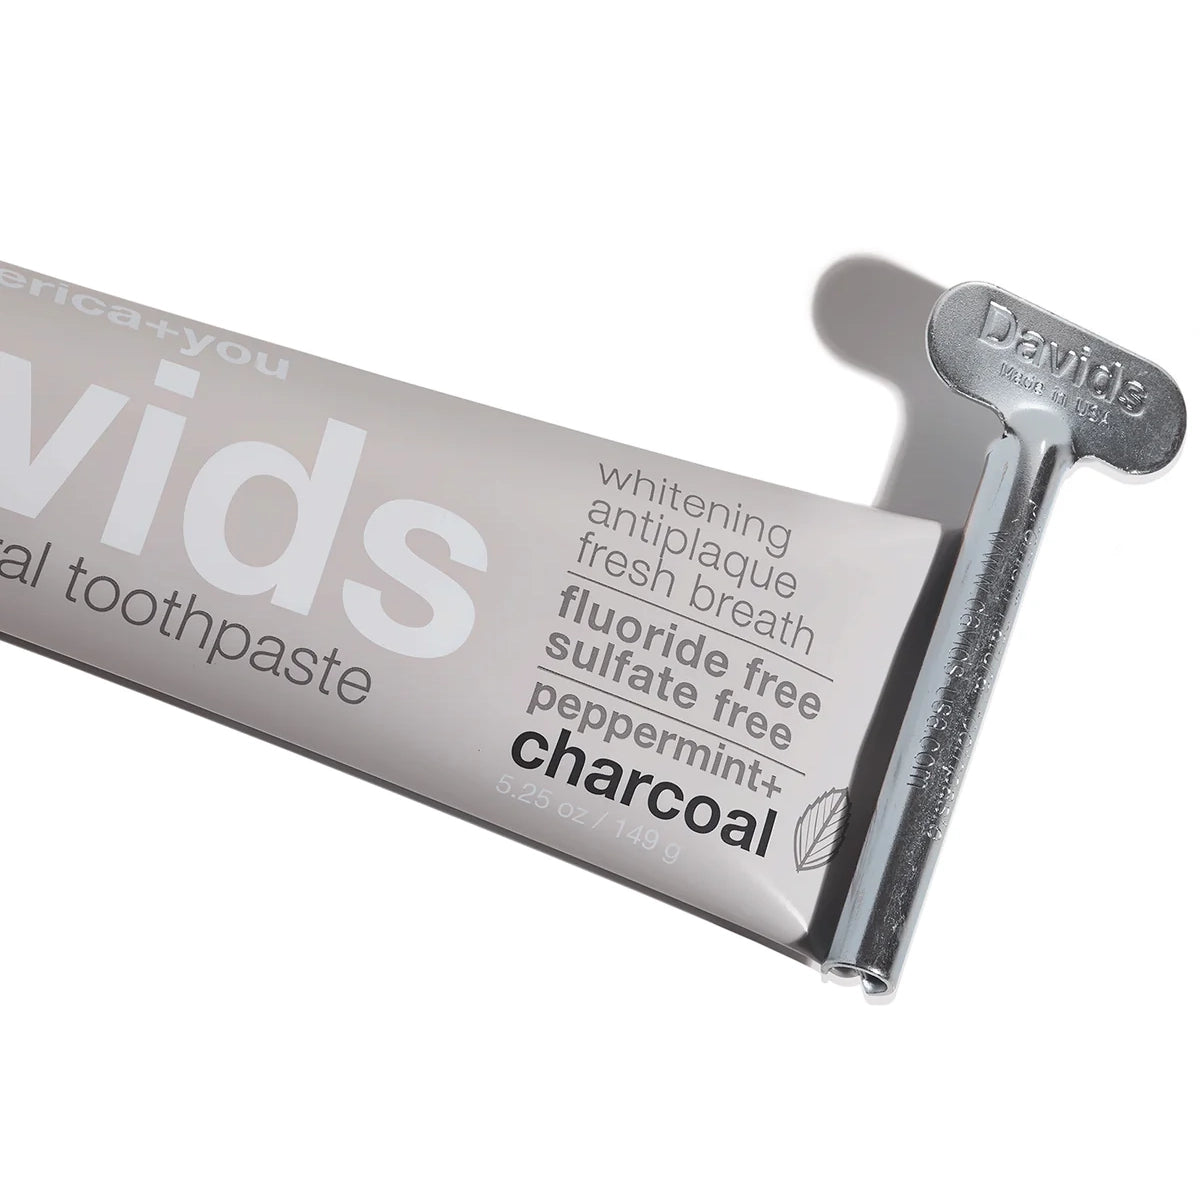 Davids Premium Toothpaste | Charcoal + Peppermint Davids Natural Toothpaste 